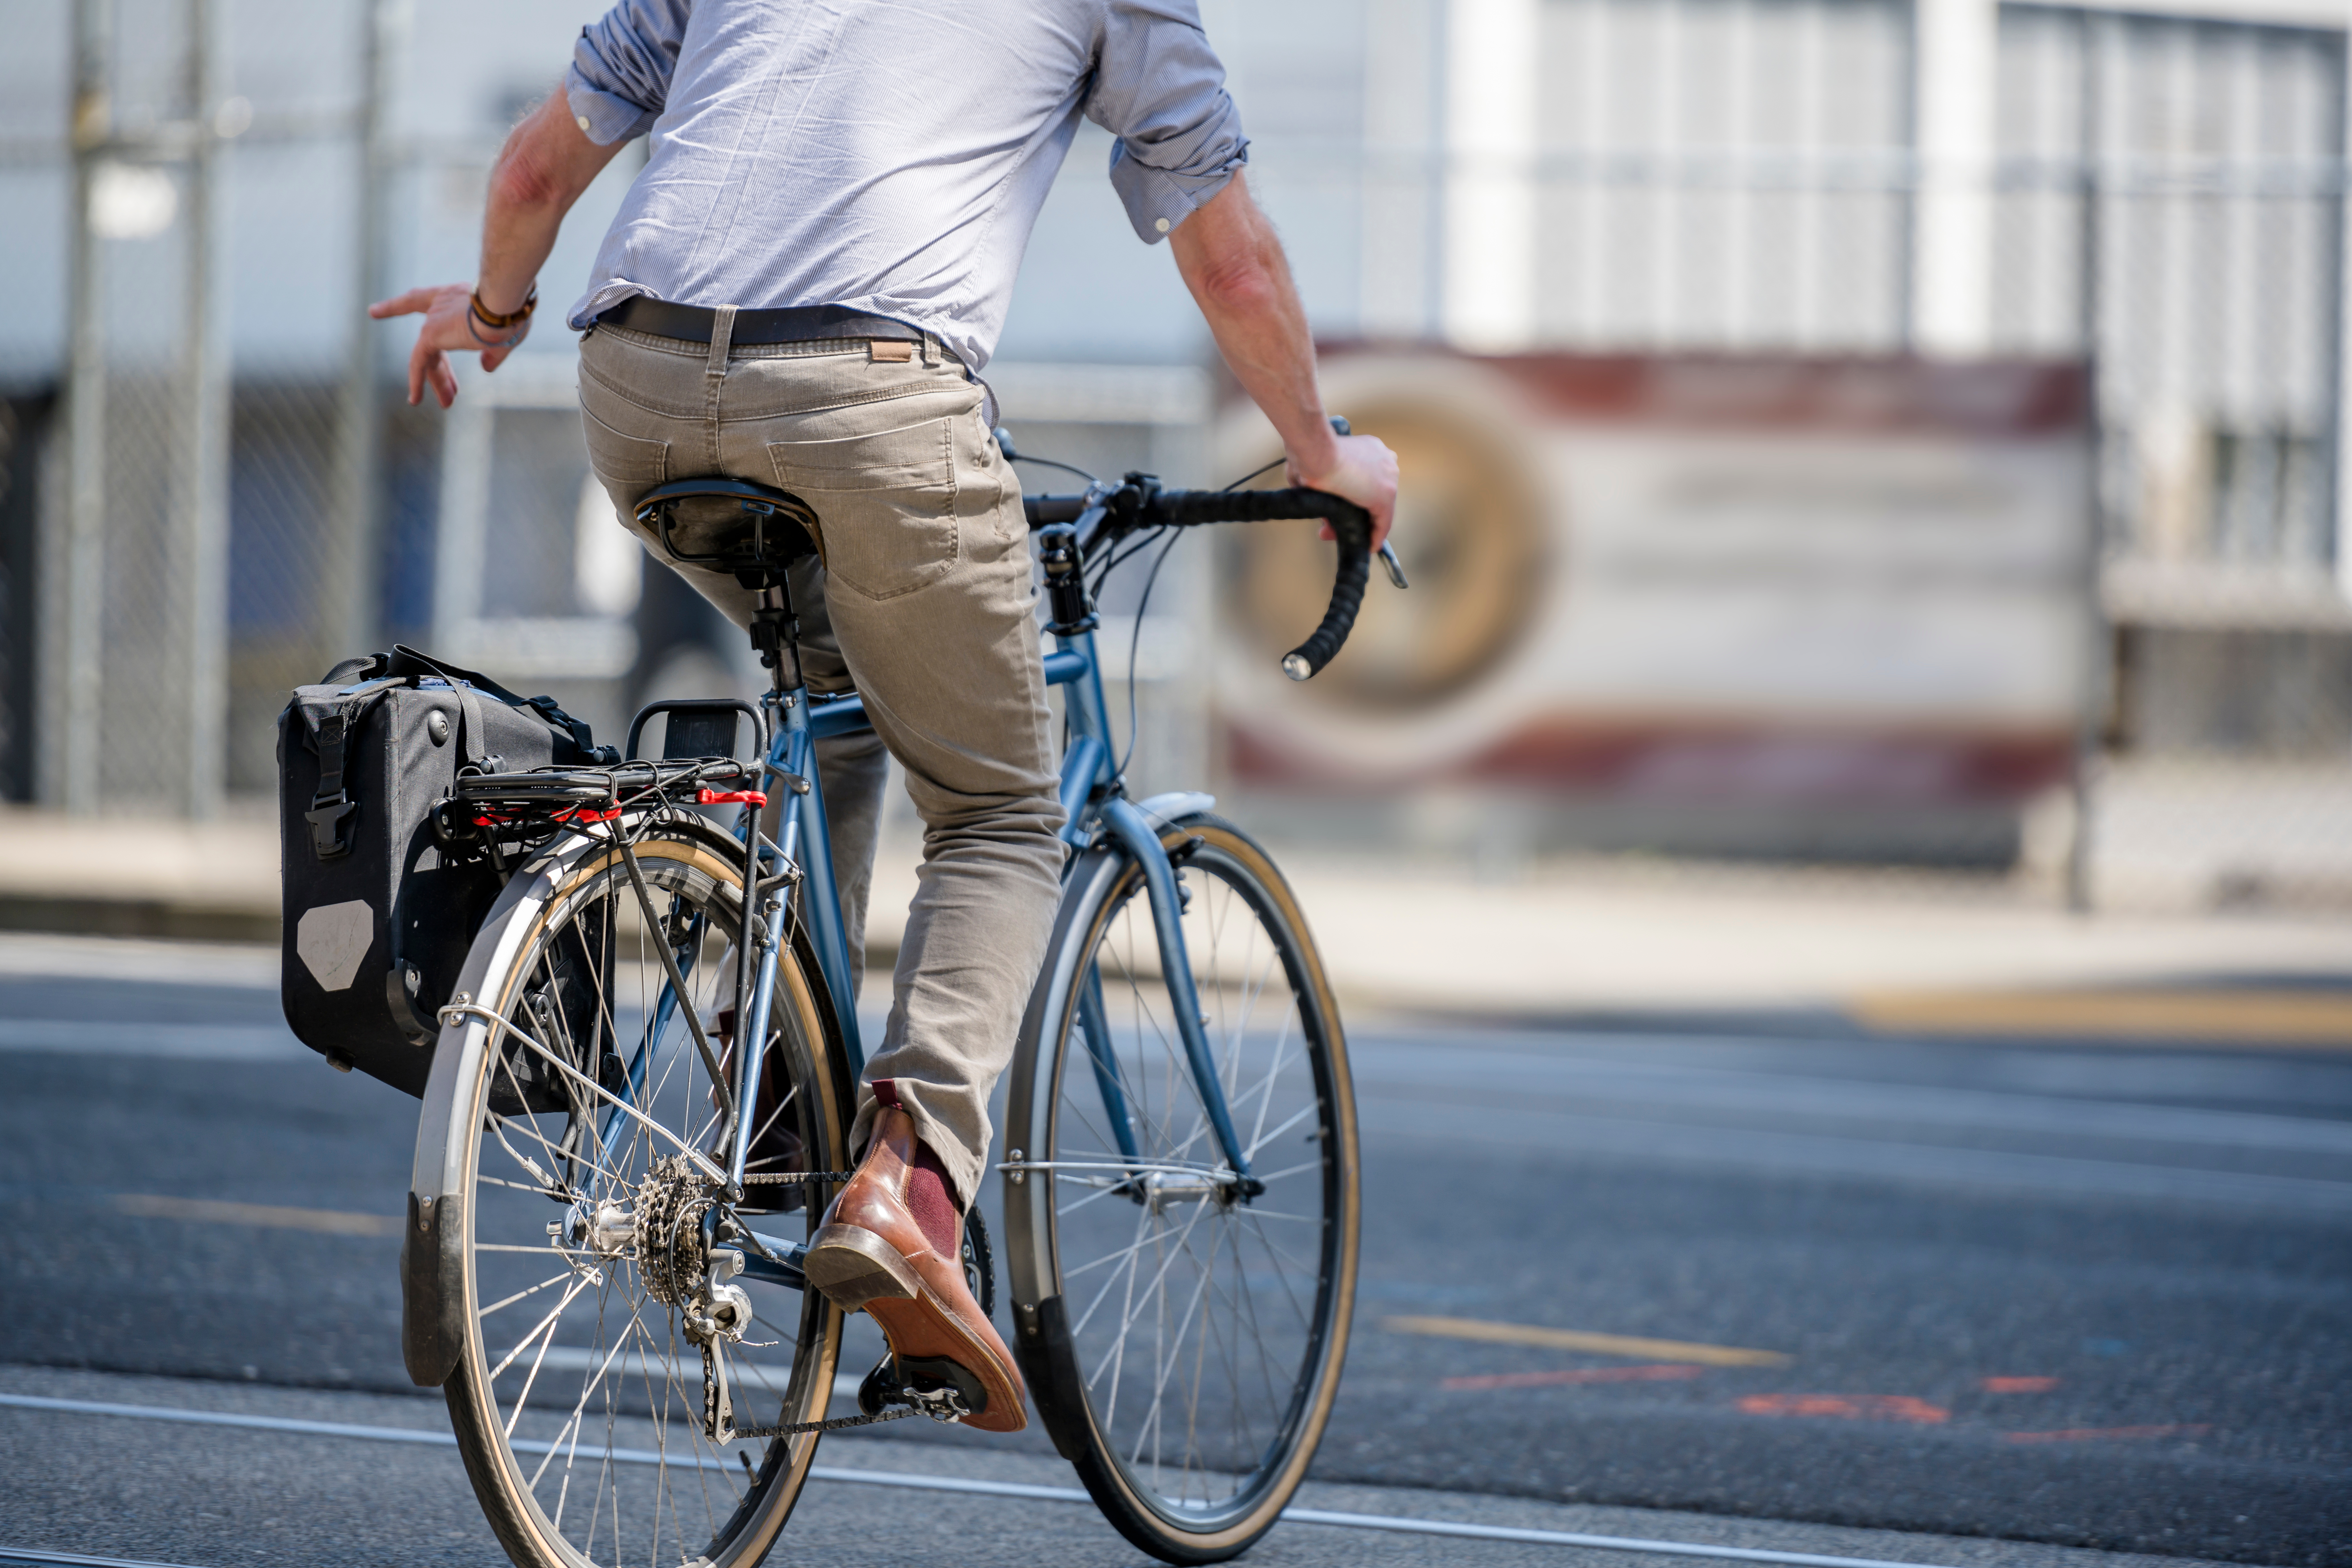 ICBC changes its policy on seeking costs from cyclists and pedestrians​​